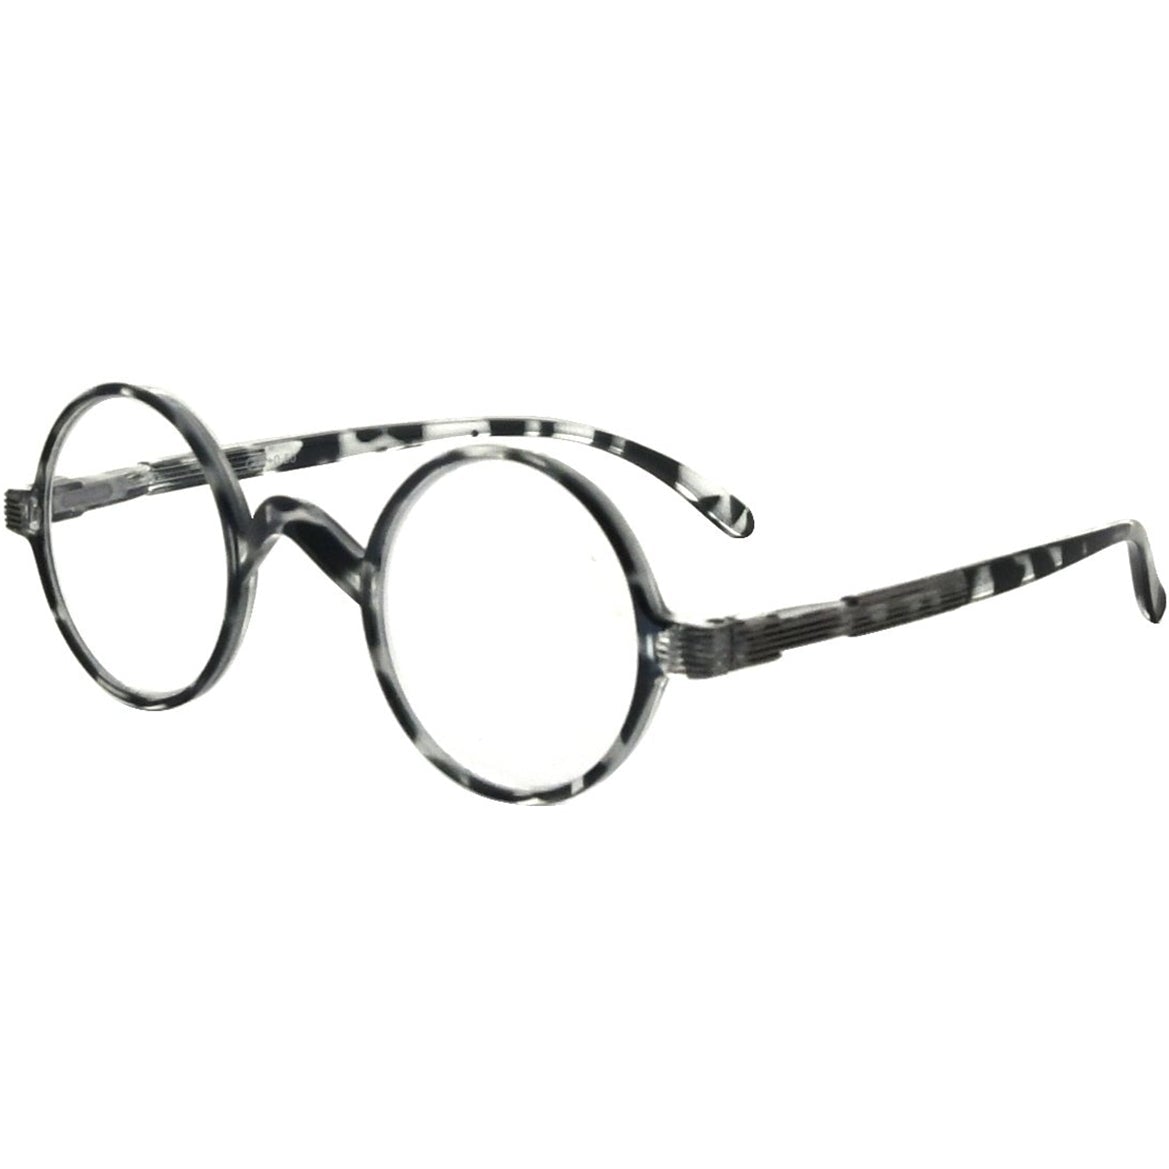 Round Chic Reading Glasses for Men and Women R077Beyekeeper.com